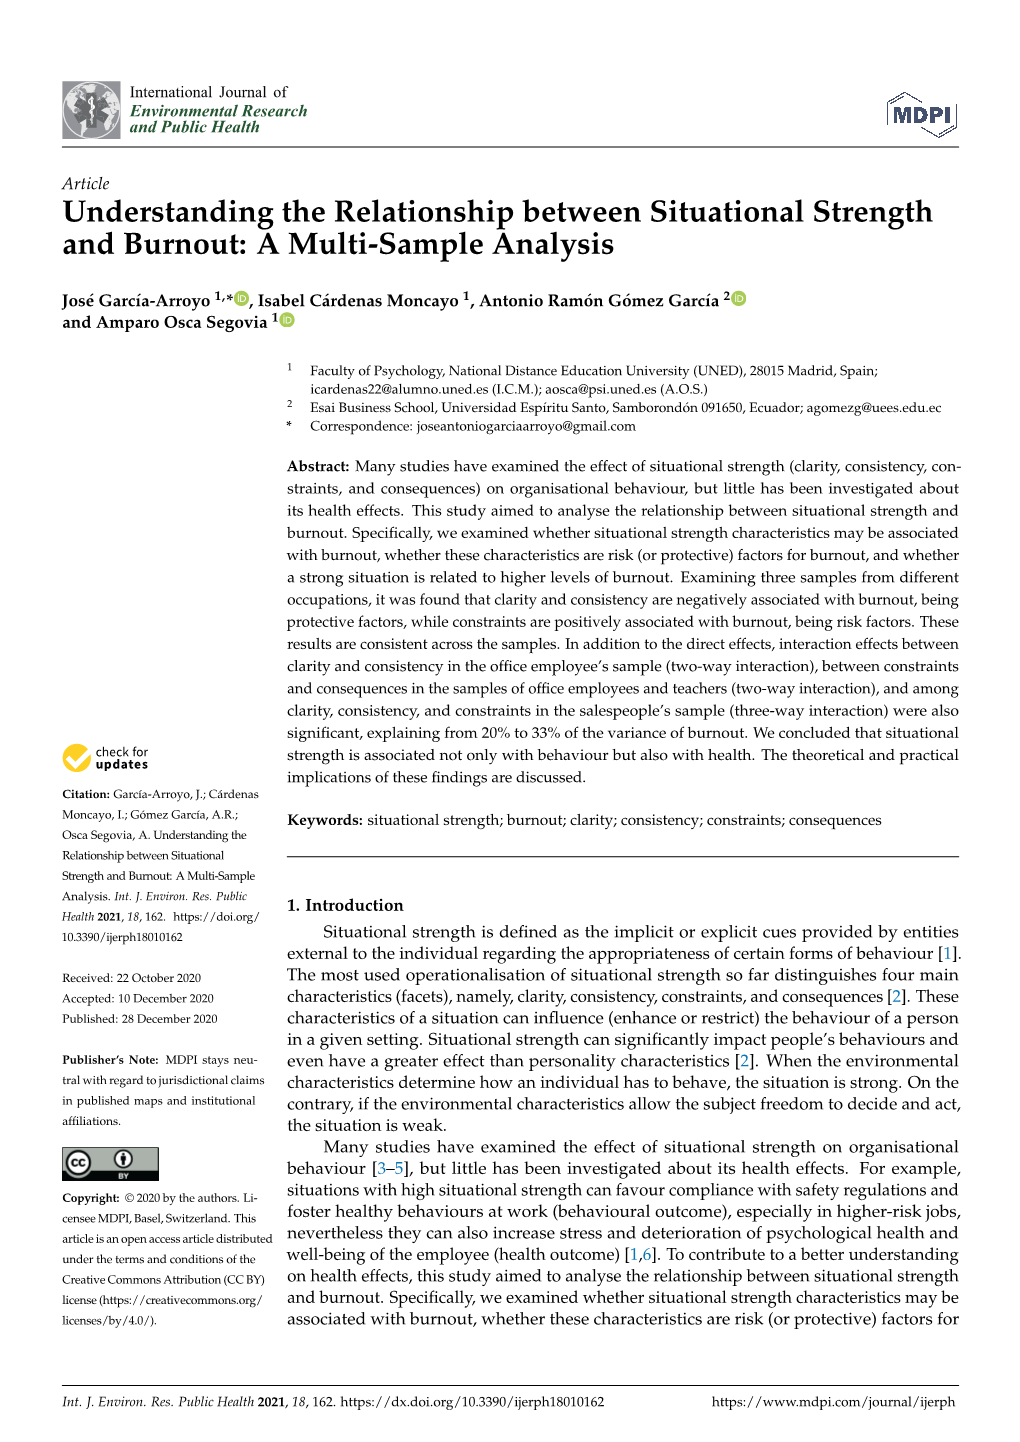 Understanding the Relationship Between Situational Strength and Burnout: a Multi-Sample Analysis